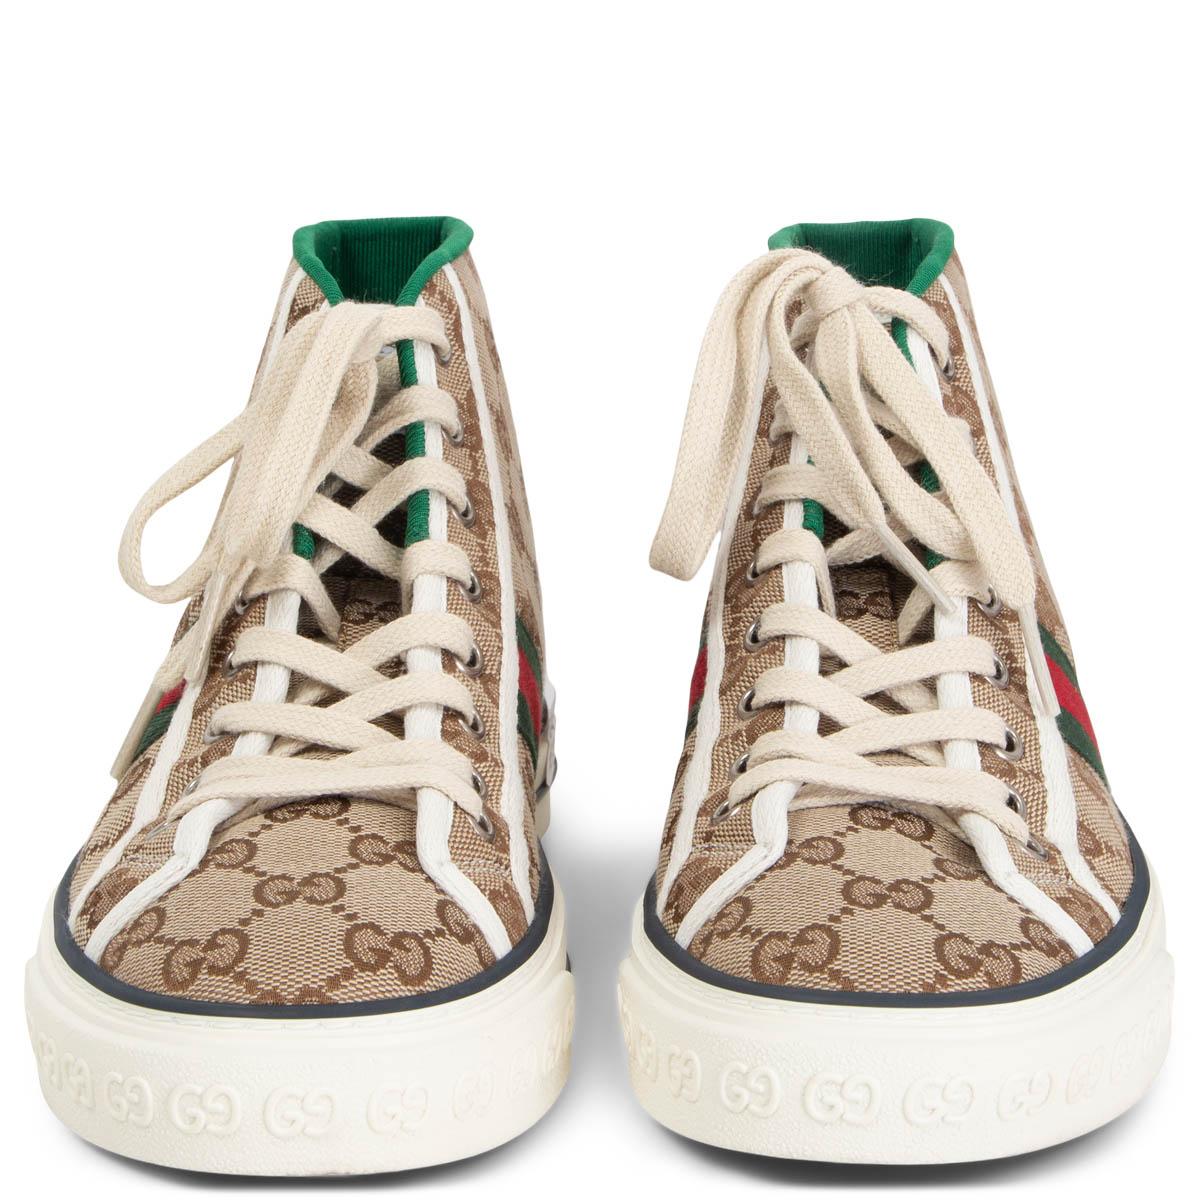 100% authentic Gucci Tennis 1977 high-top sneakers in beige and brown monogram canvas with the iconic red and green Web stripe on the side and white canvas trimming. GG motif at the sole. Have been worn once or twice and are in excellent condition.